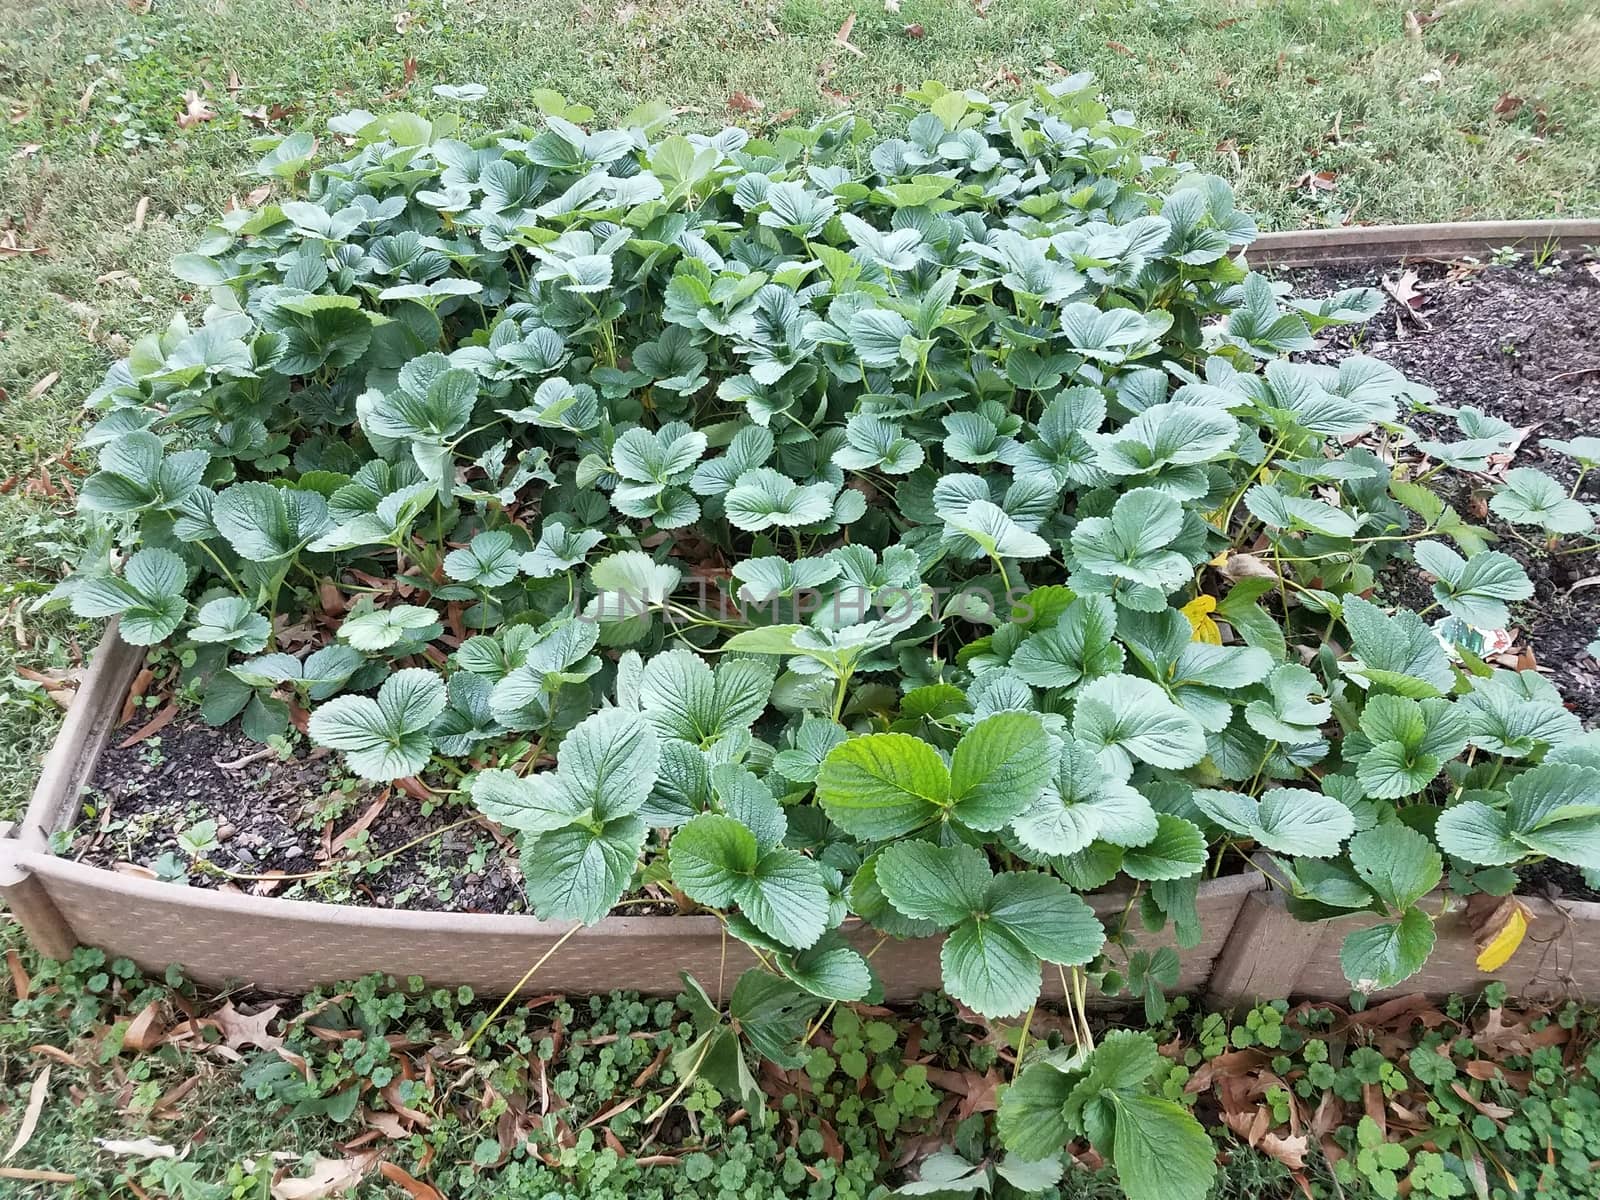 strawberry plants with green leaves growing in a small garden